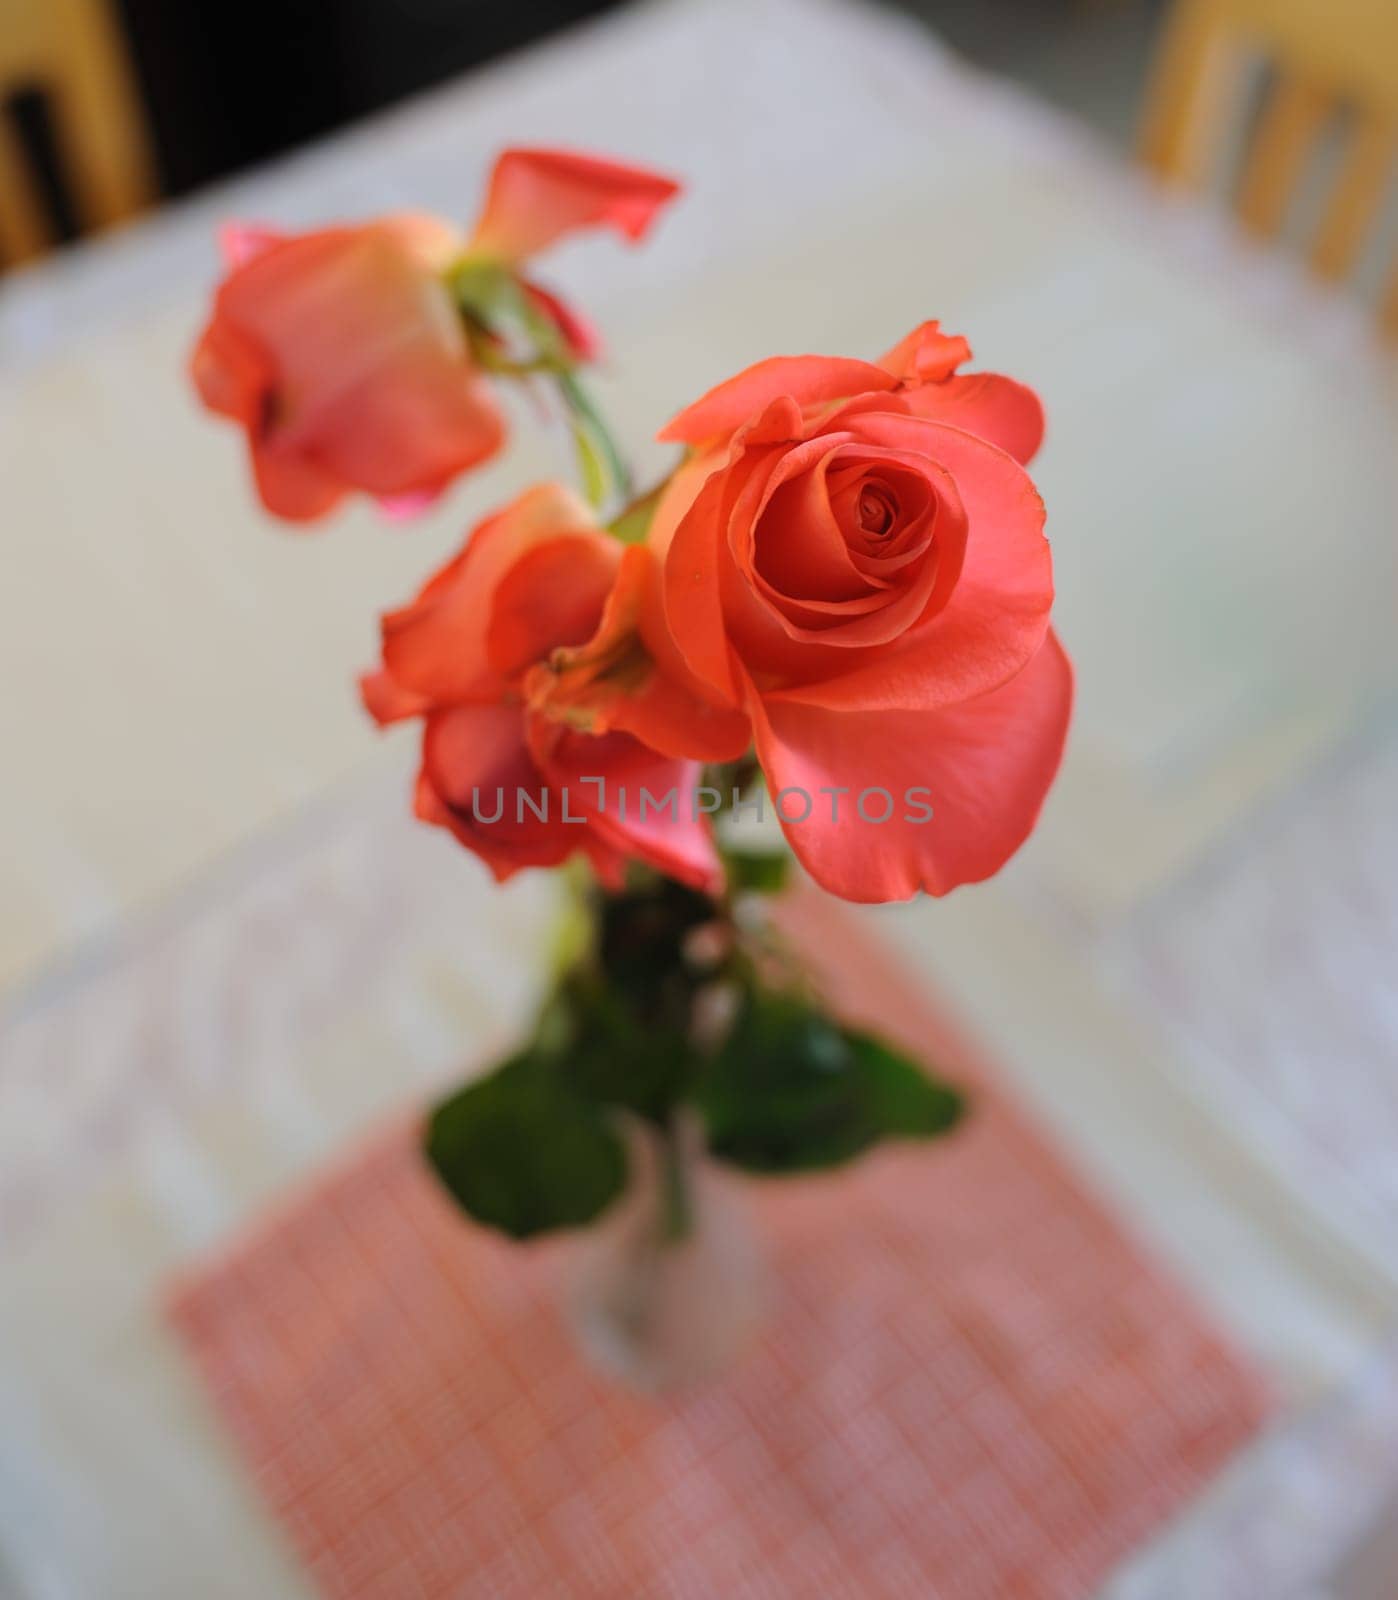 Marcescent scarlet roses on a table. Close up image of flowers by Imagenet